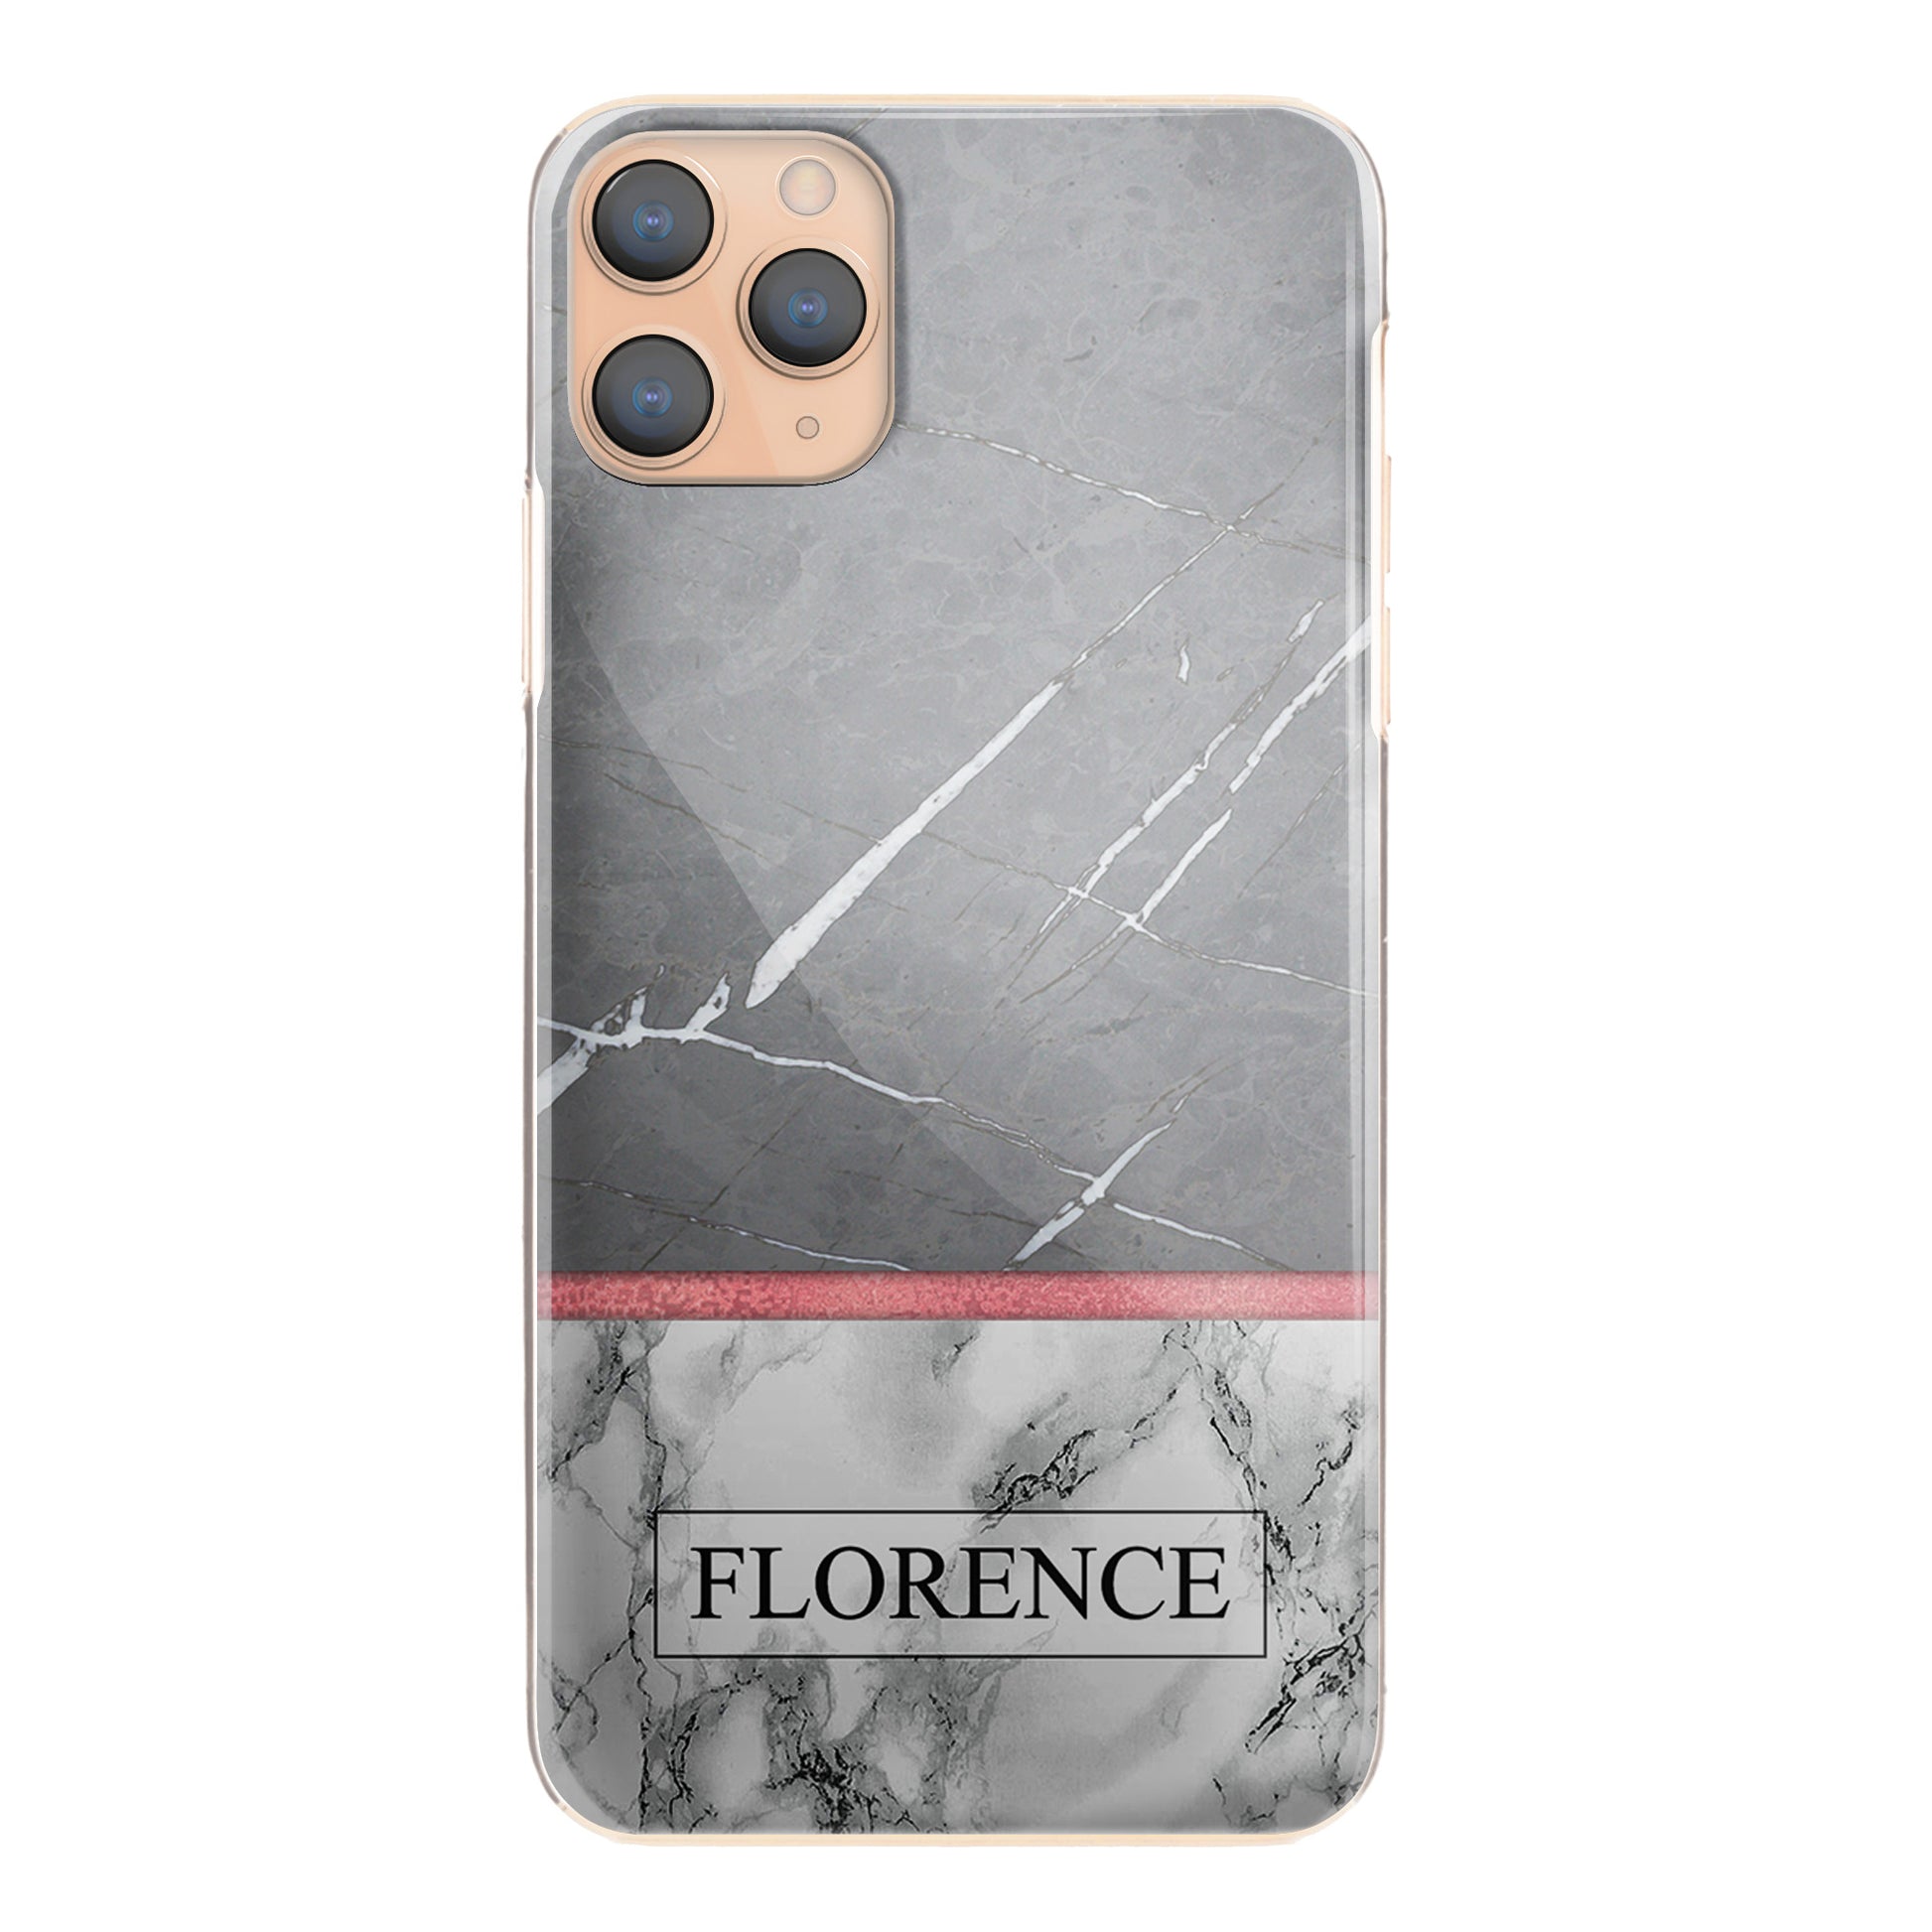 Personalised HTC Phone Hard Case with Classy Text on Stylish Dual Marble